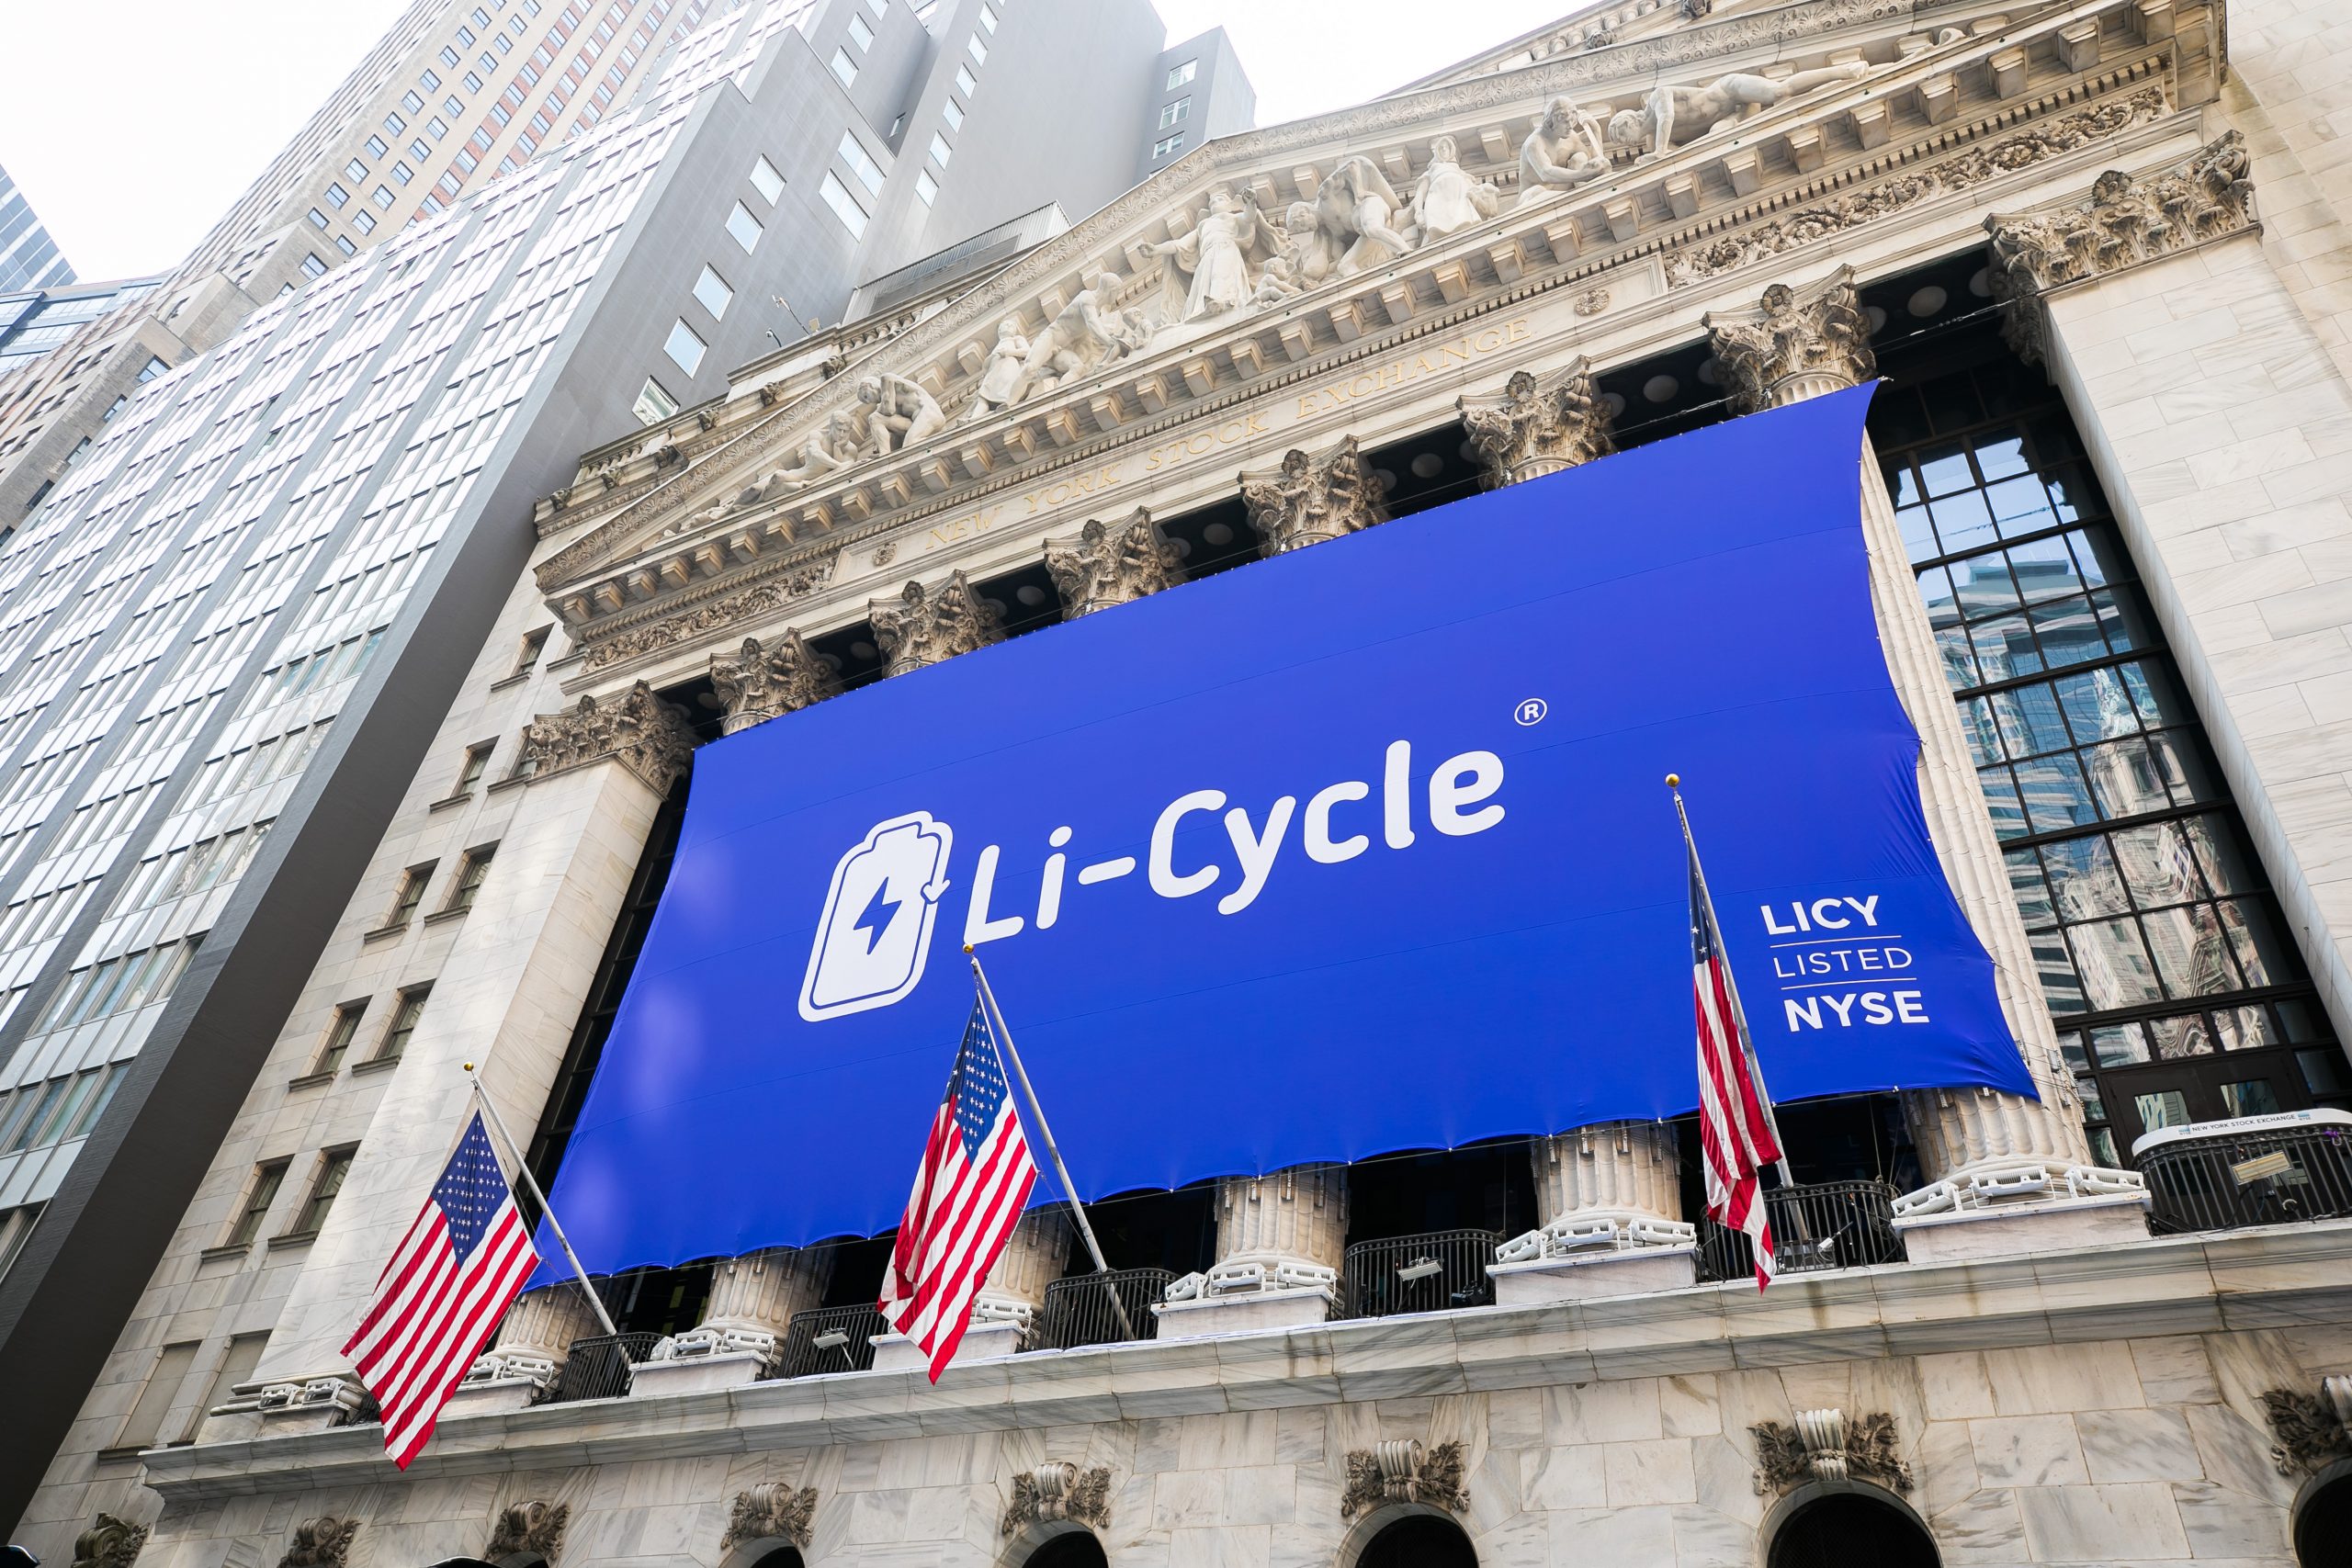 L-Cycle NYSE banner image